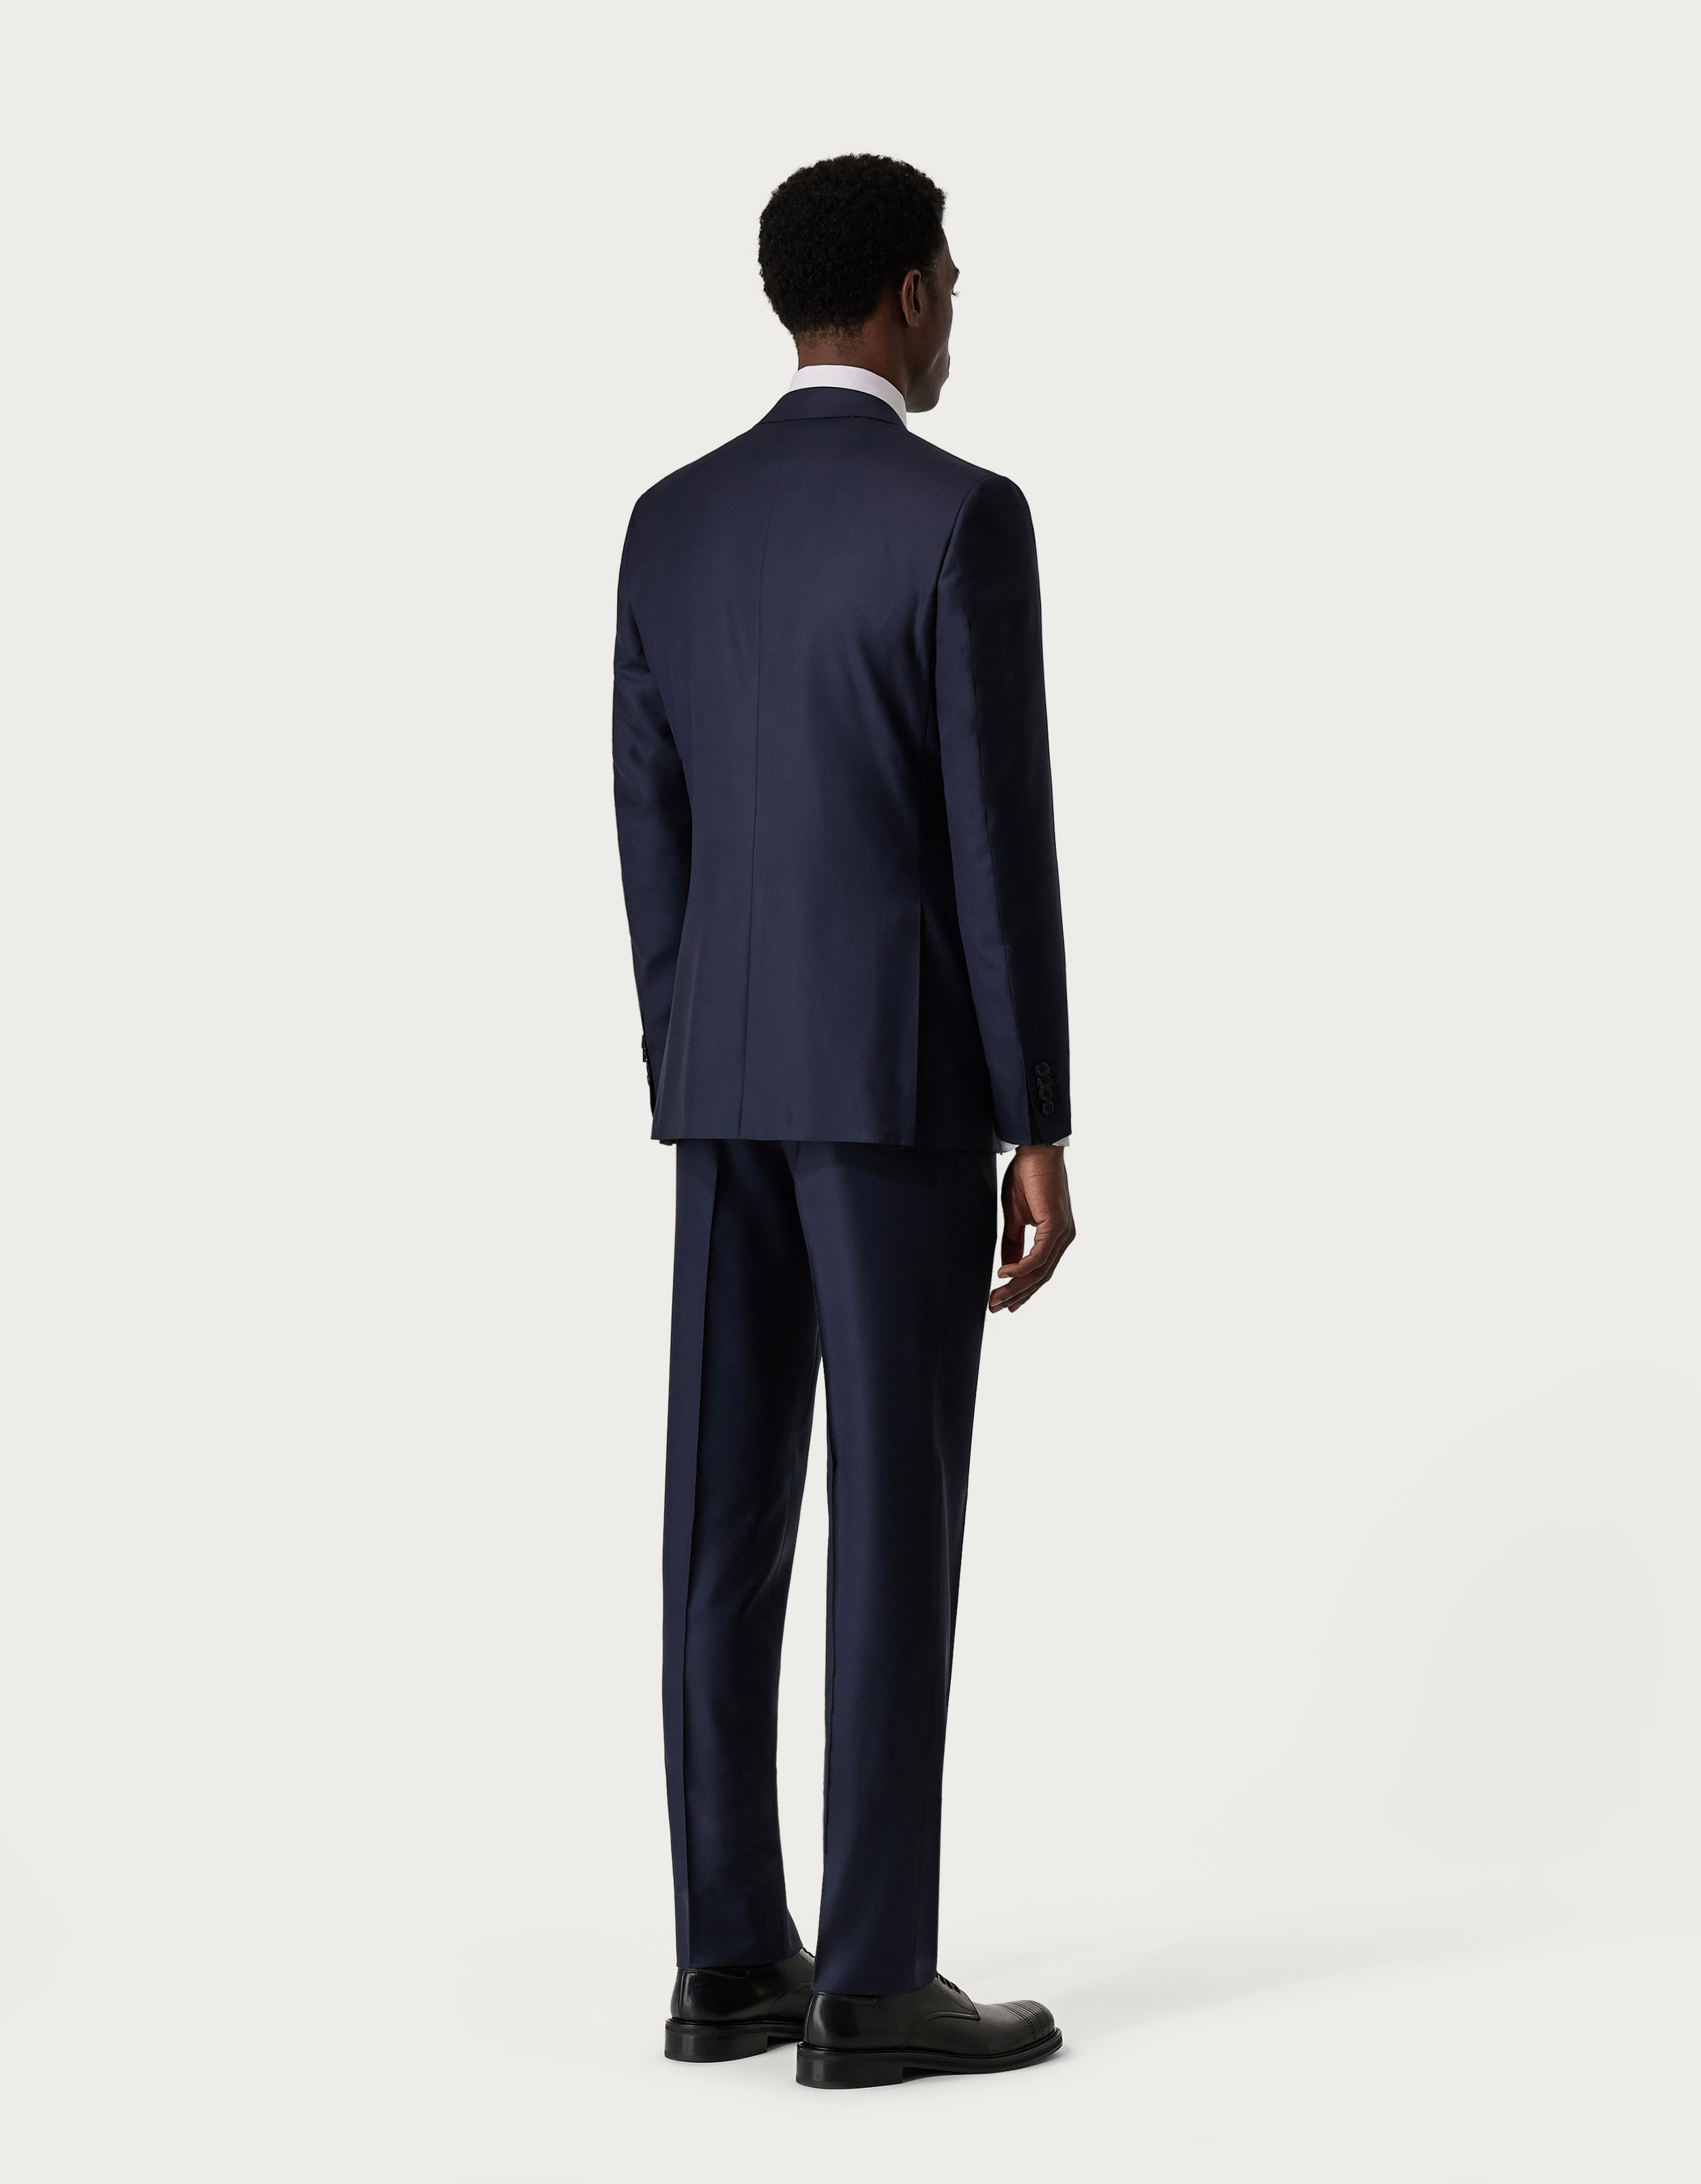 Navy blue suit with waistcoat in wool - Canali INTL